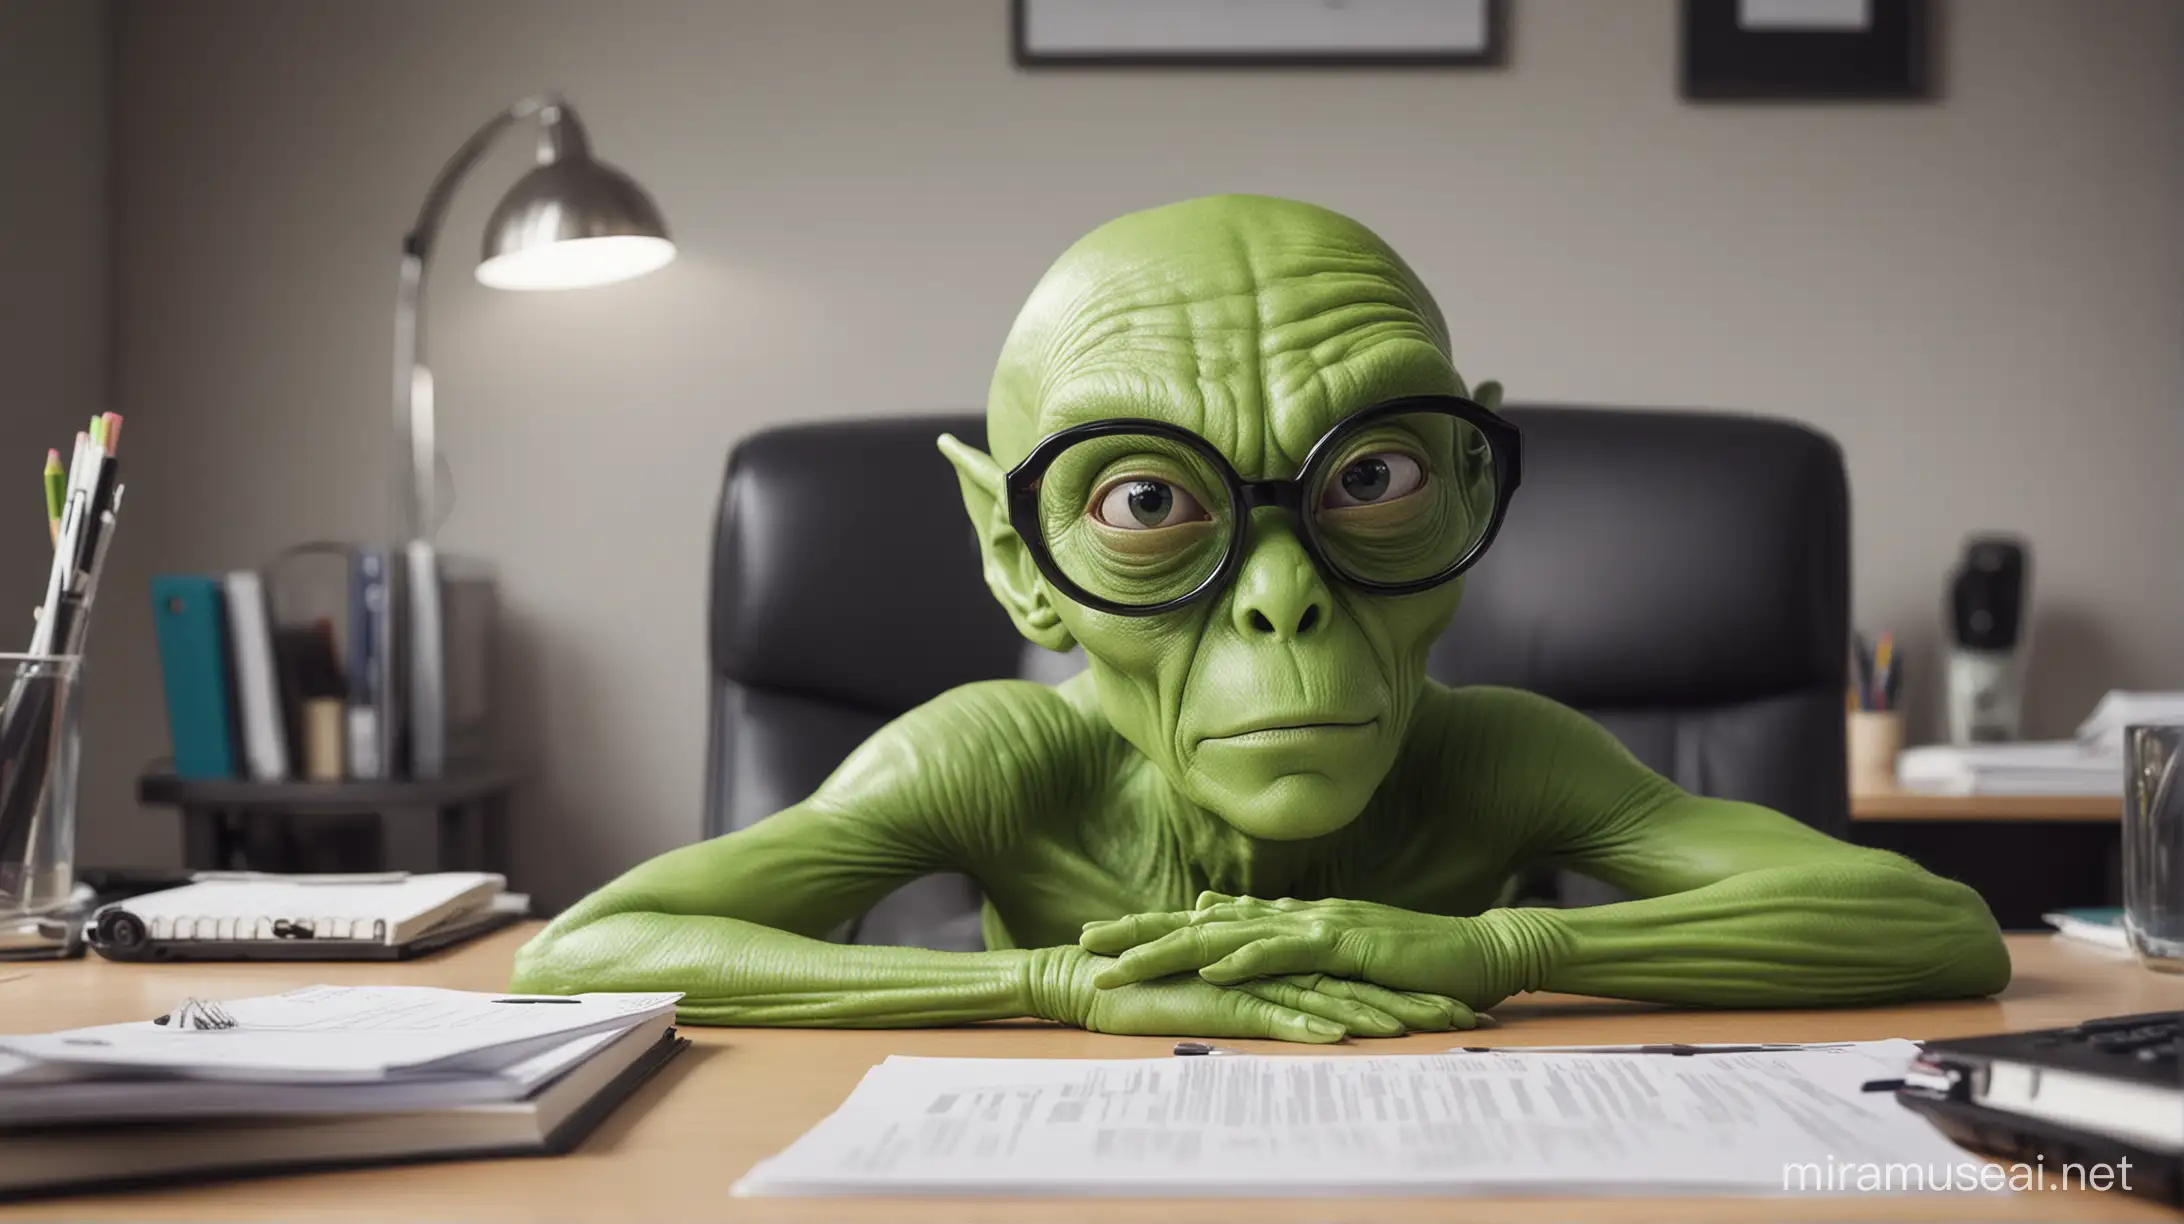 Green alien who a bit like your typical glasses-wearing creative director lying down 
in an office